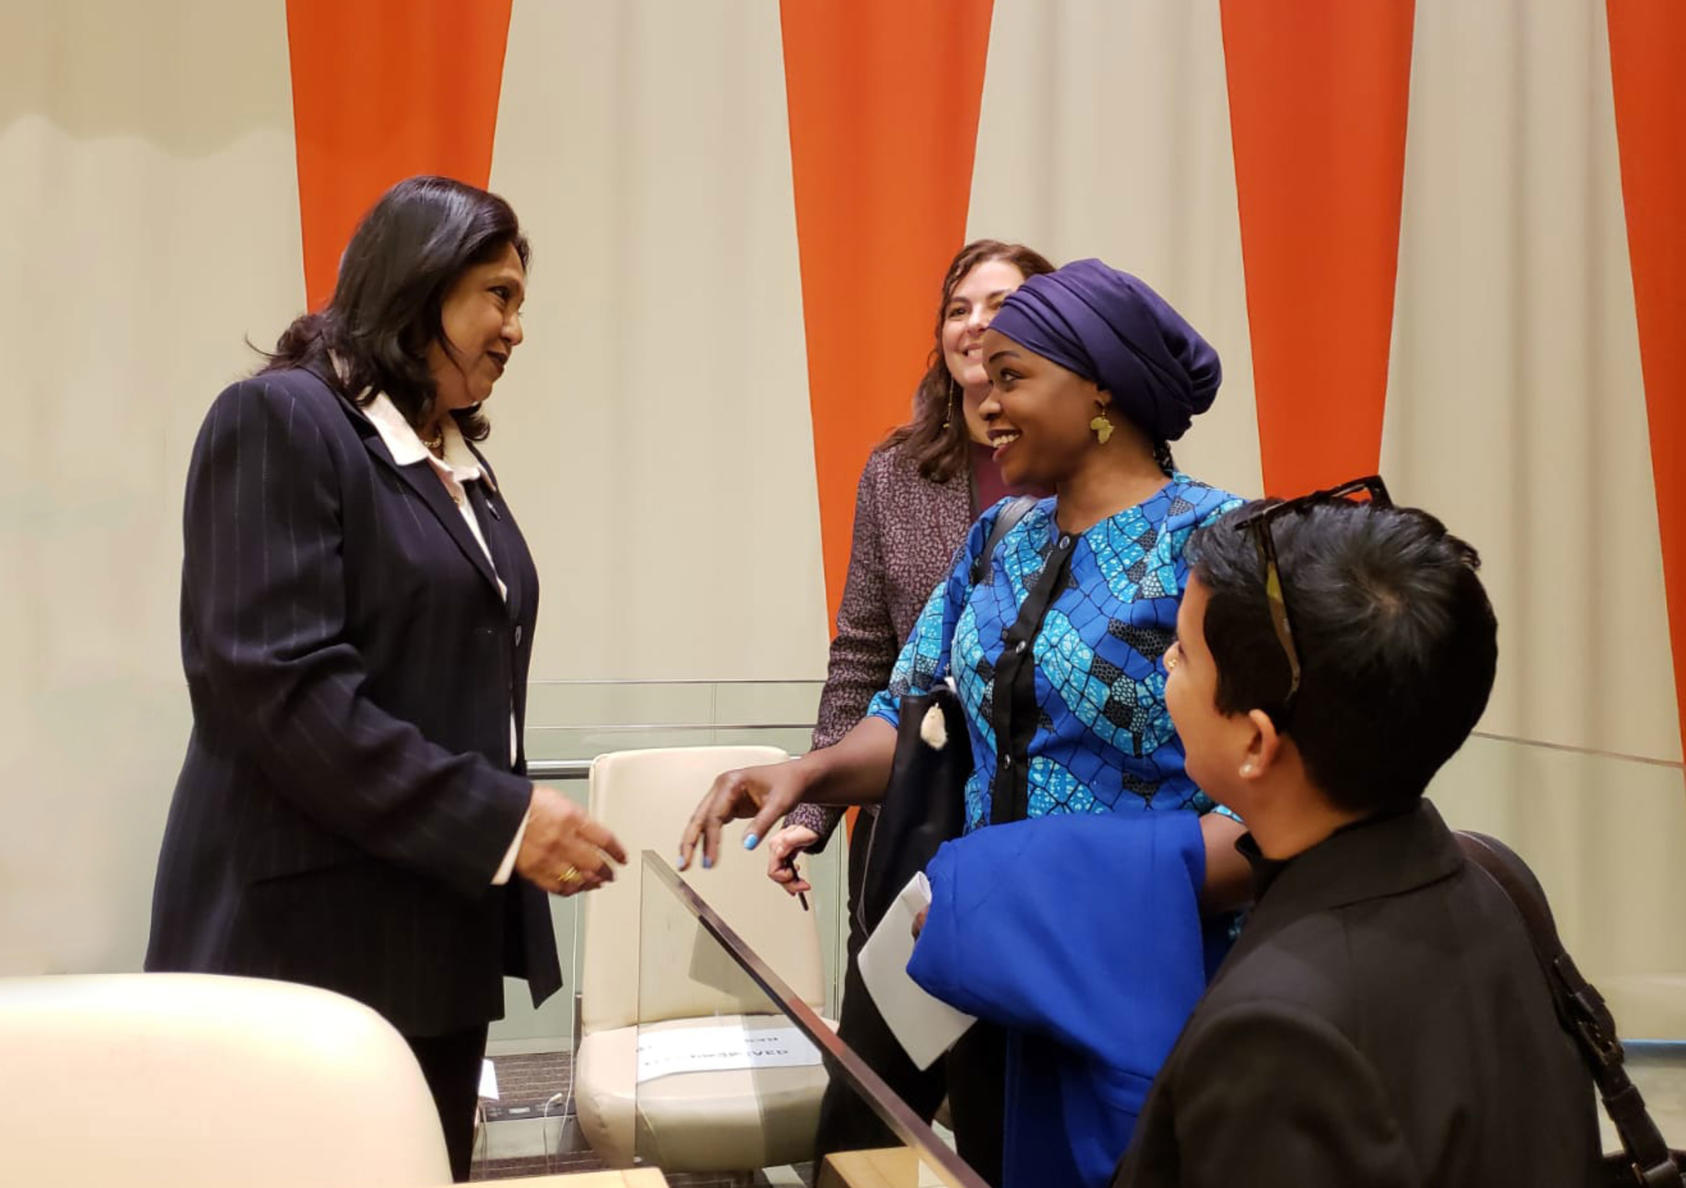 Rita Lopidia meets Pramila Patten, left, a representative of the U.N. secretary general, at the United Nations in 2018, when both women briefed the U.N. Security Council on the widespread atrocities of sexual violence amid warfare